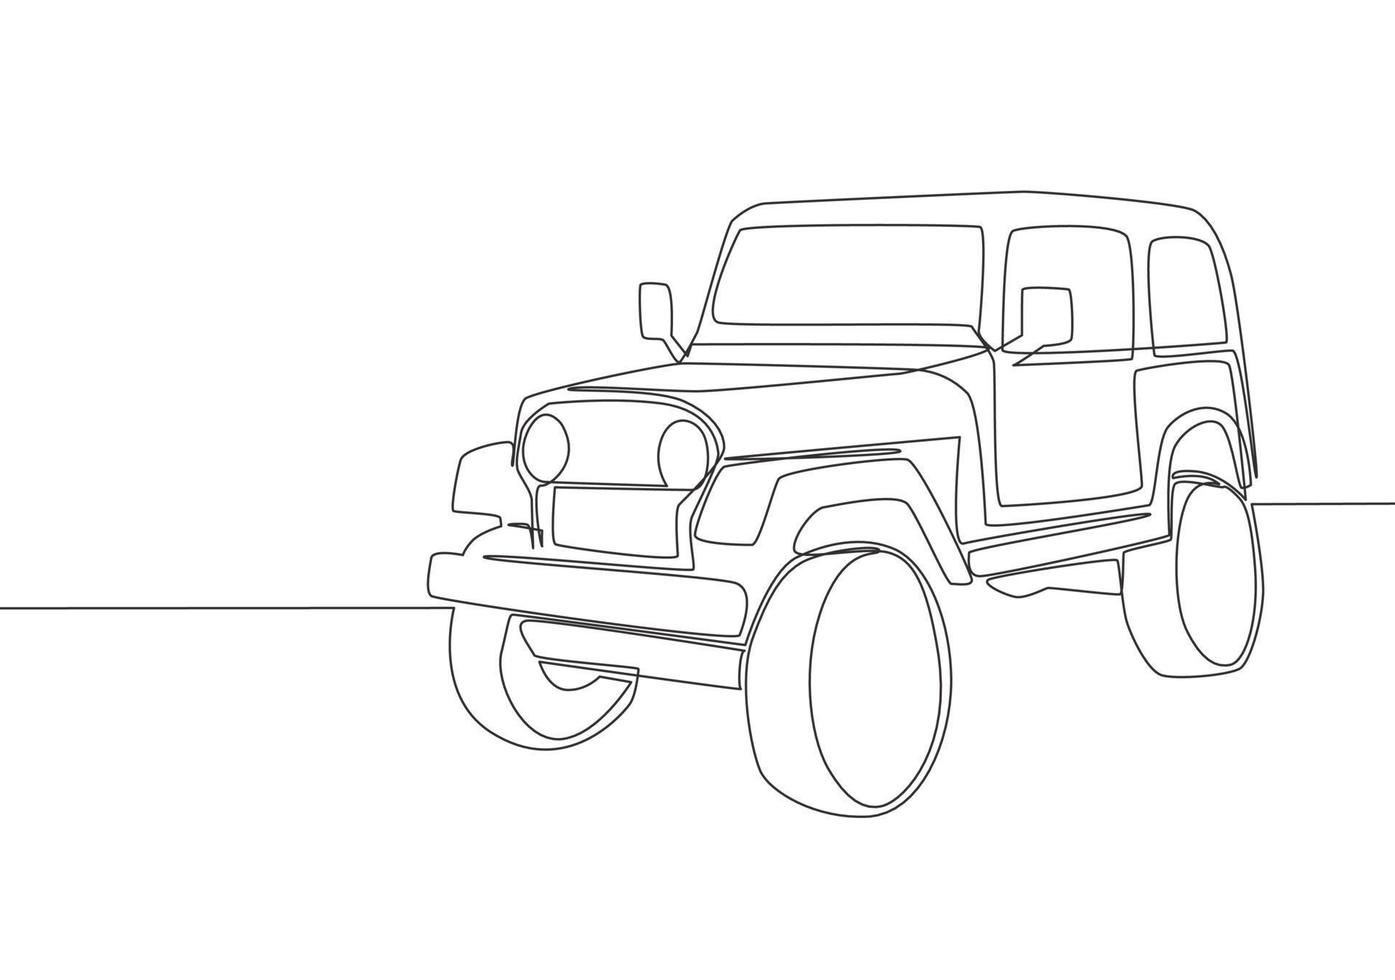 Single line drawing of 4x4 speed trail hill jeep car. Offroad adventure rally vehicle transportation concept. One continuous line draw design vector